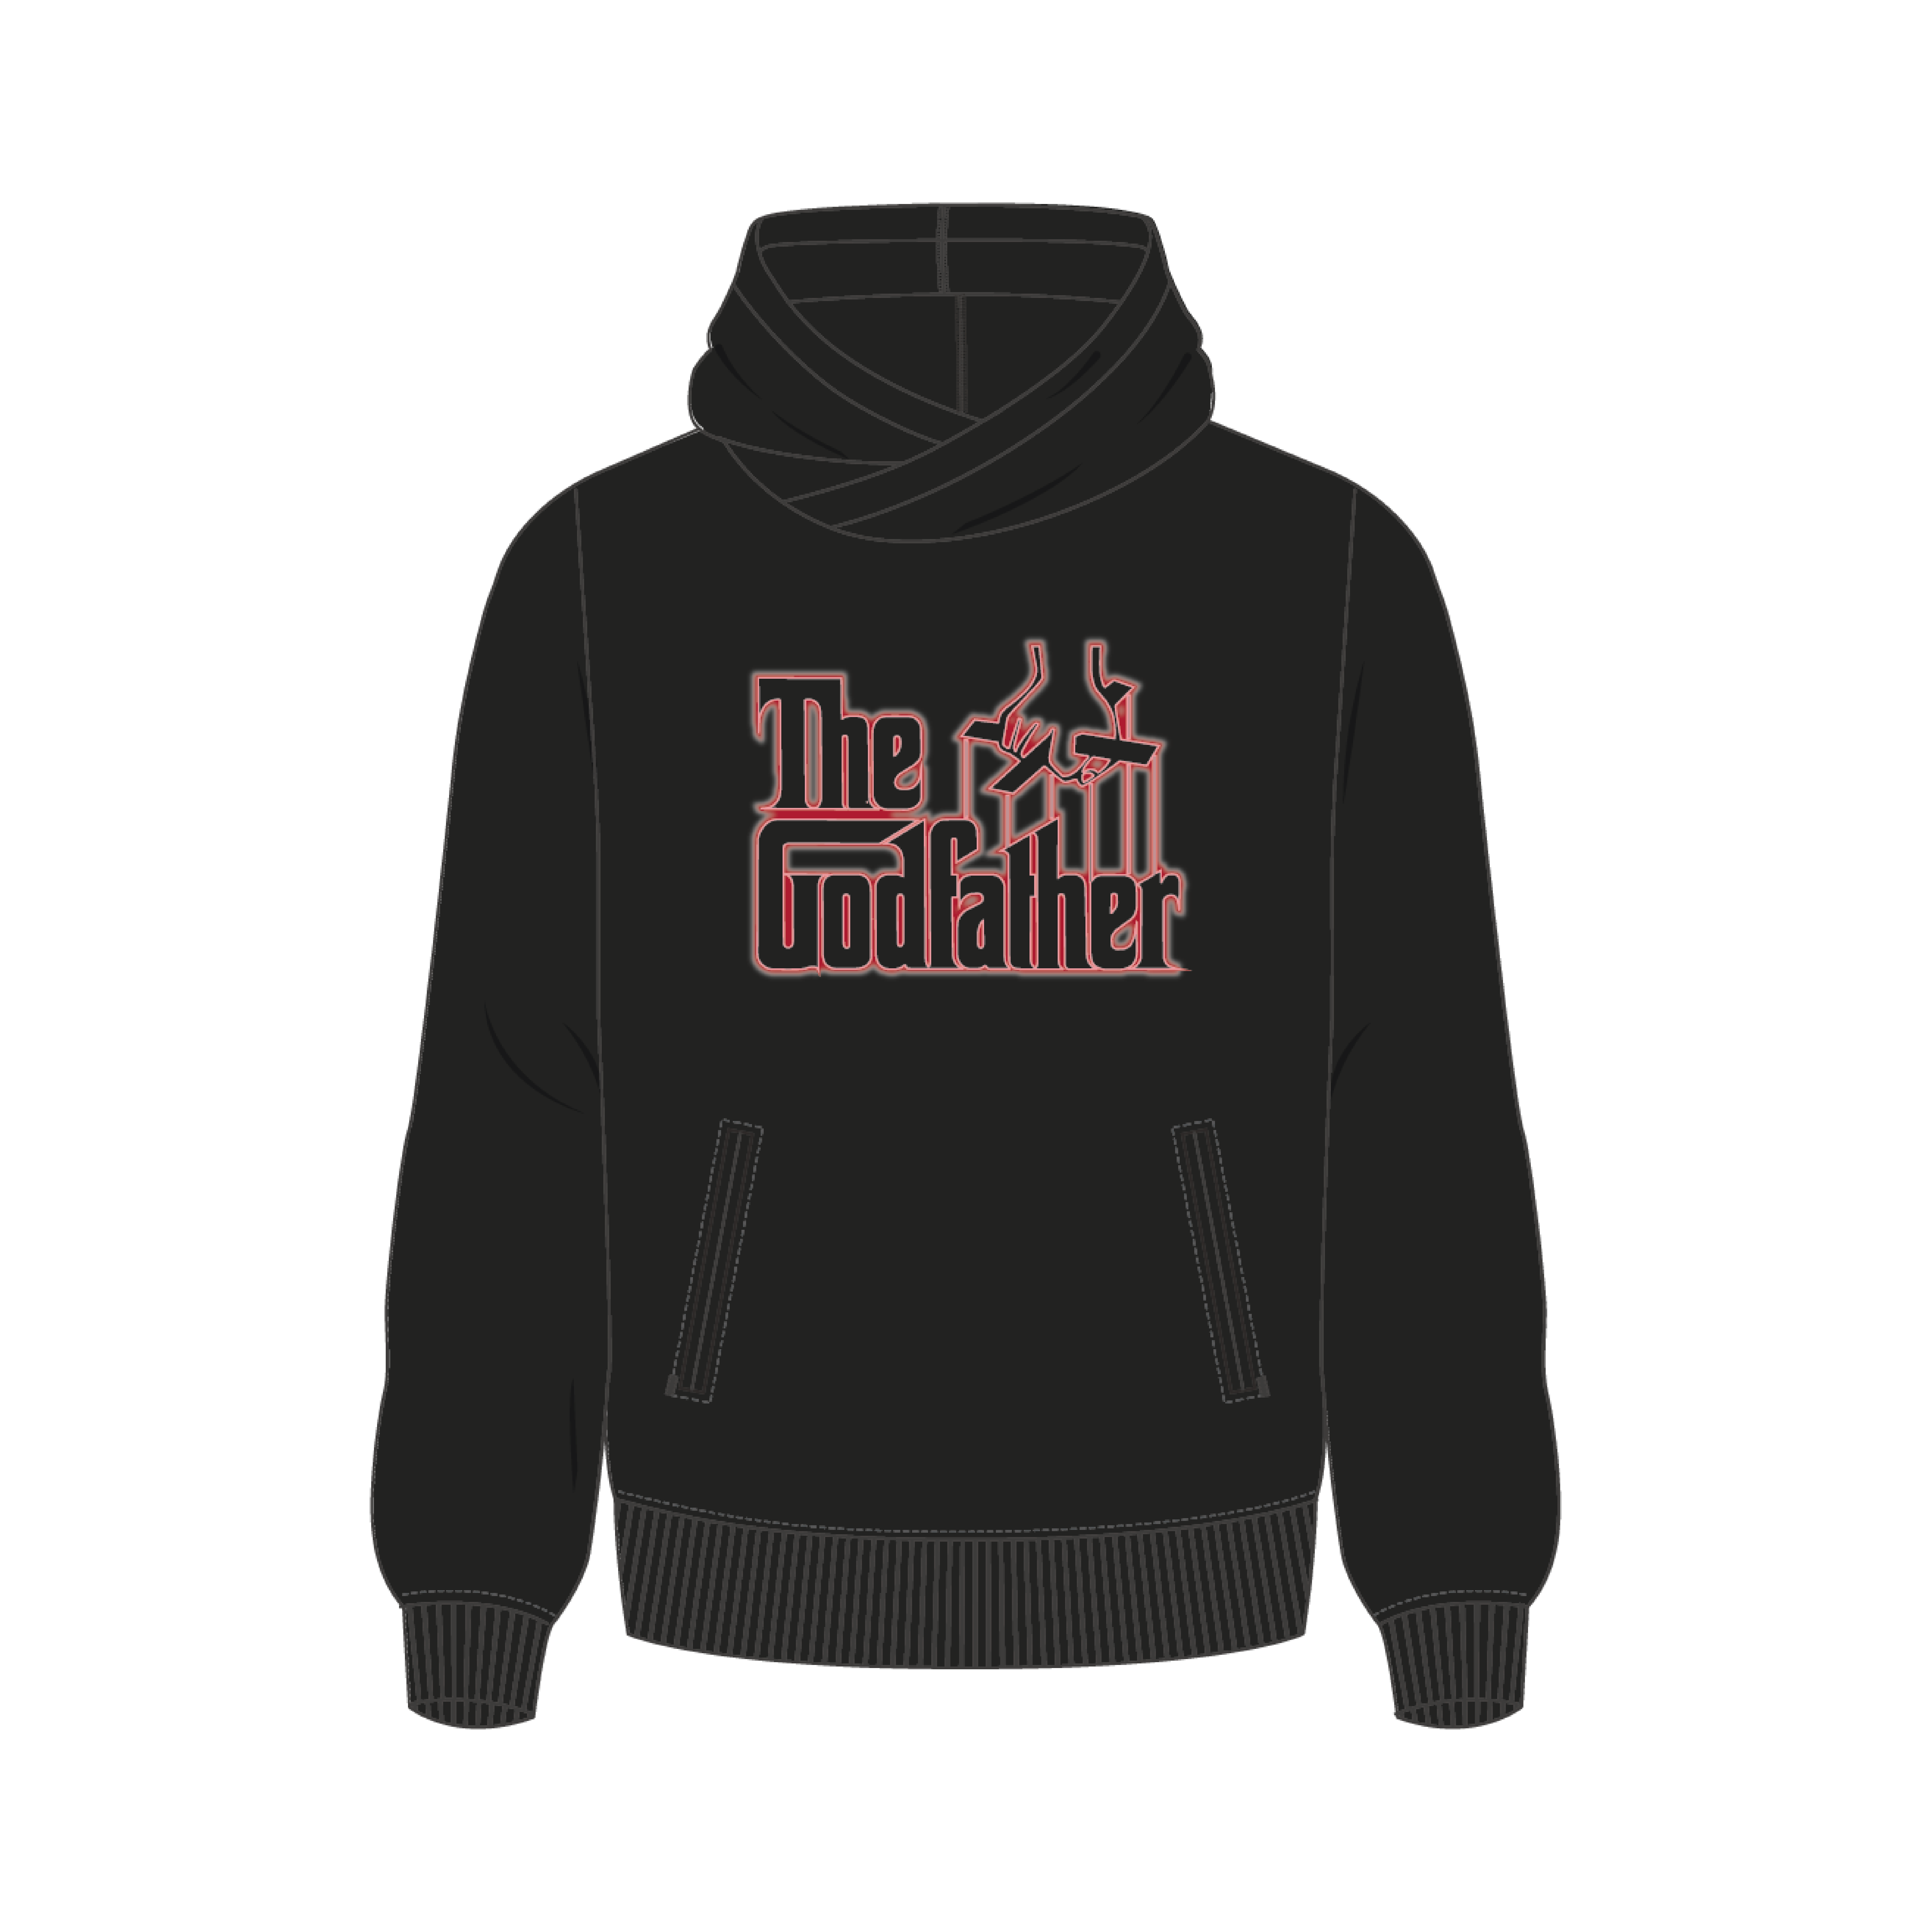 THE GOD FATHER LOGO HOODIE - Fexpro